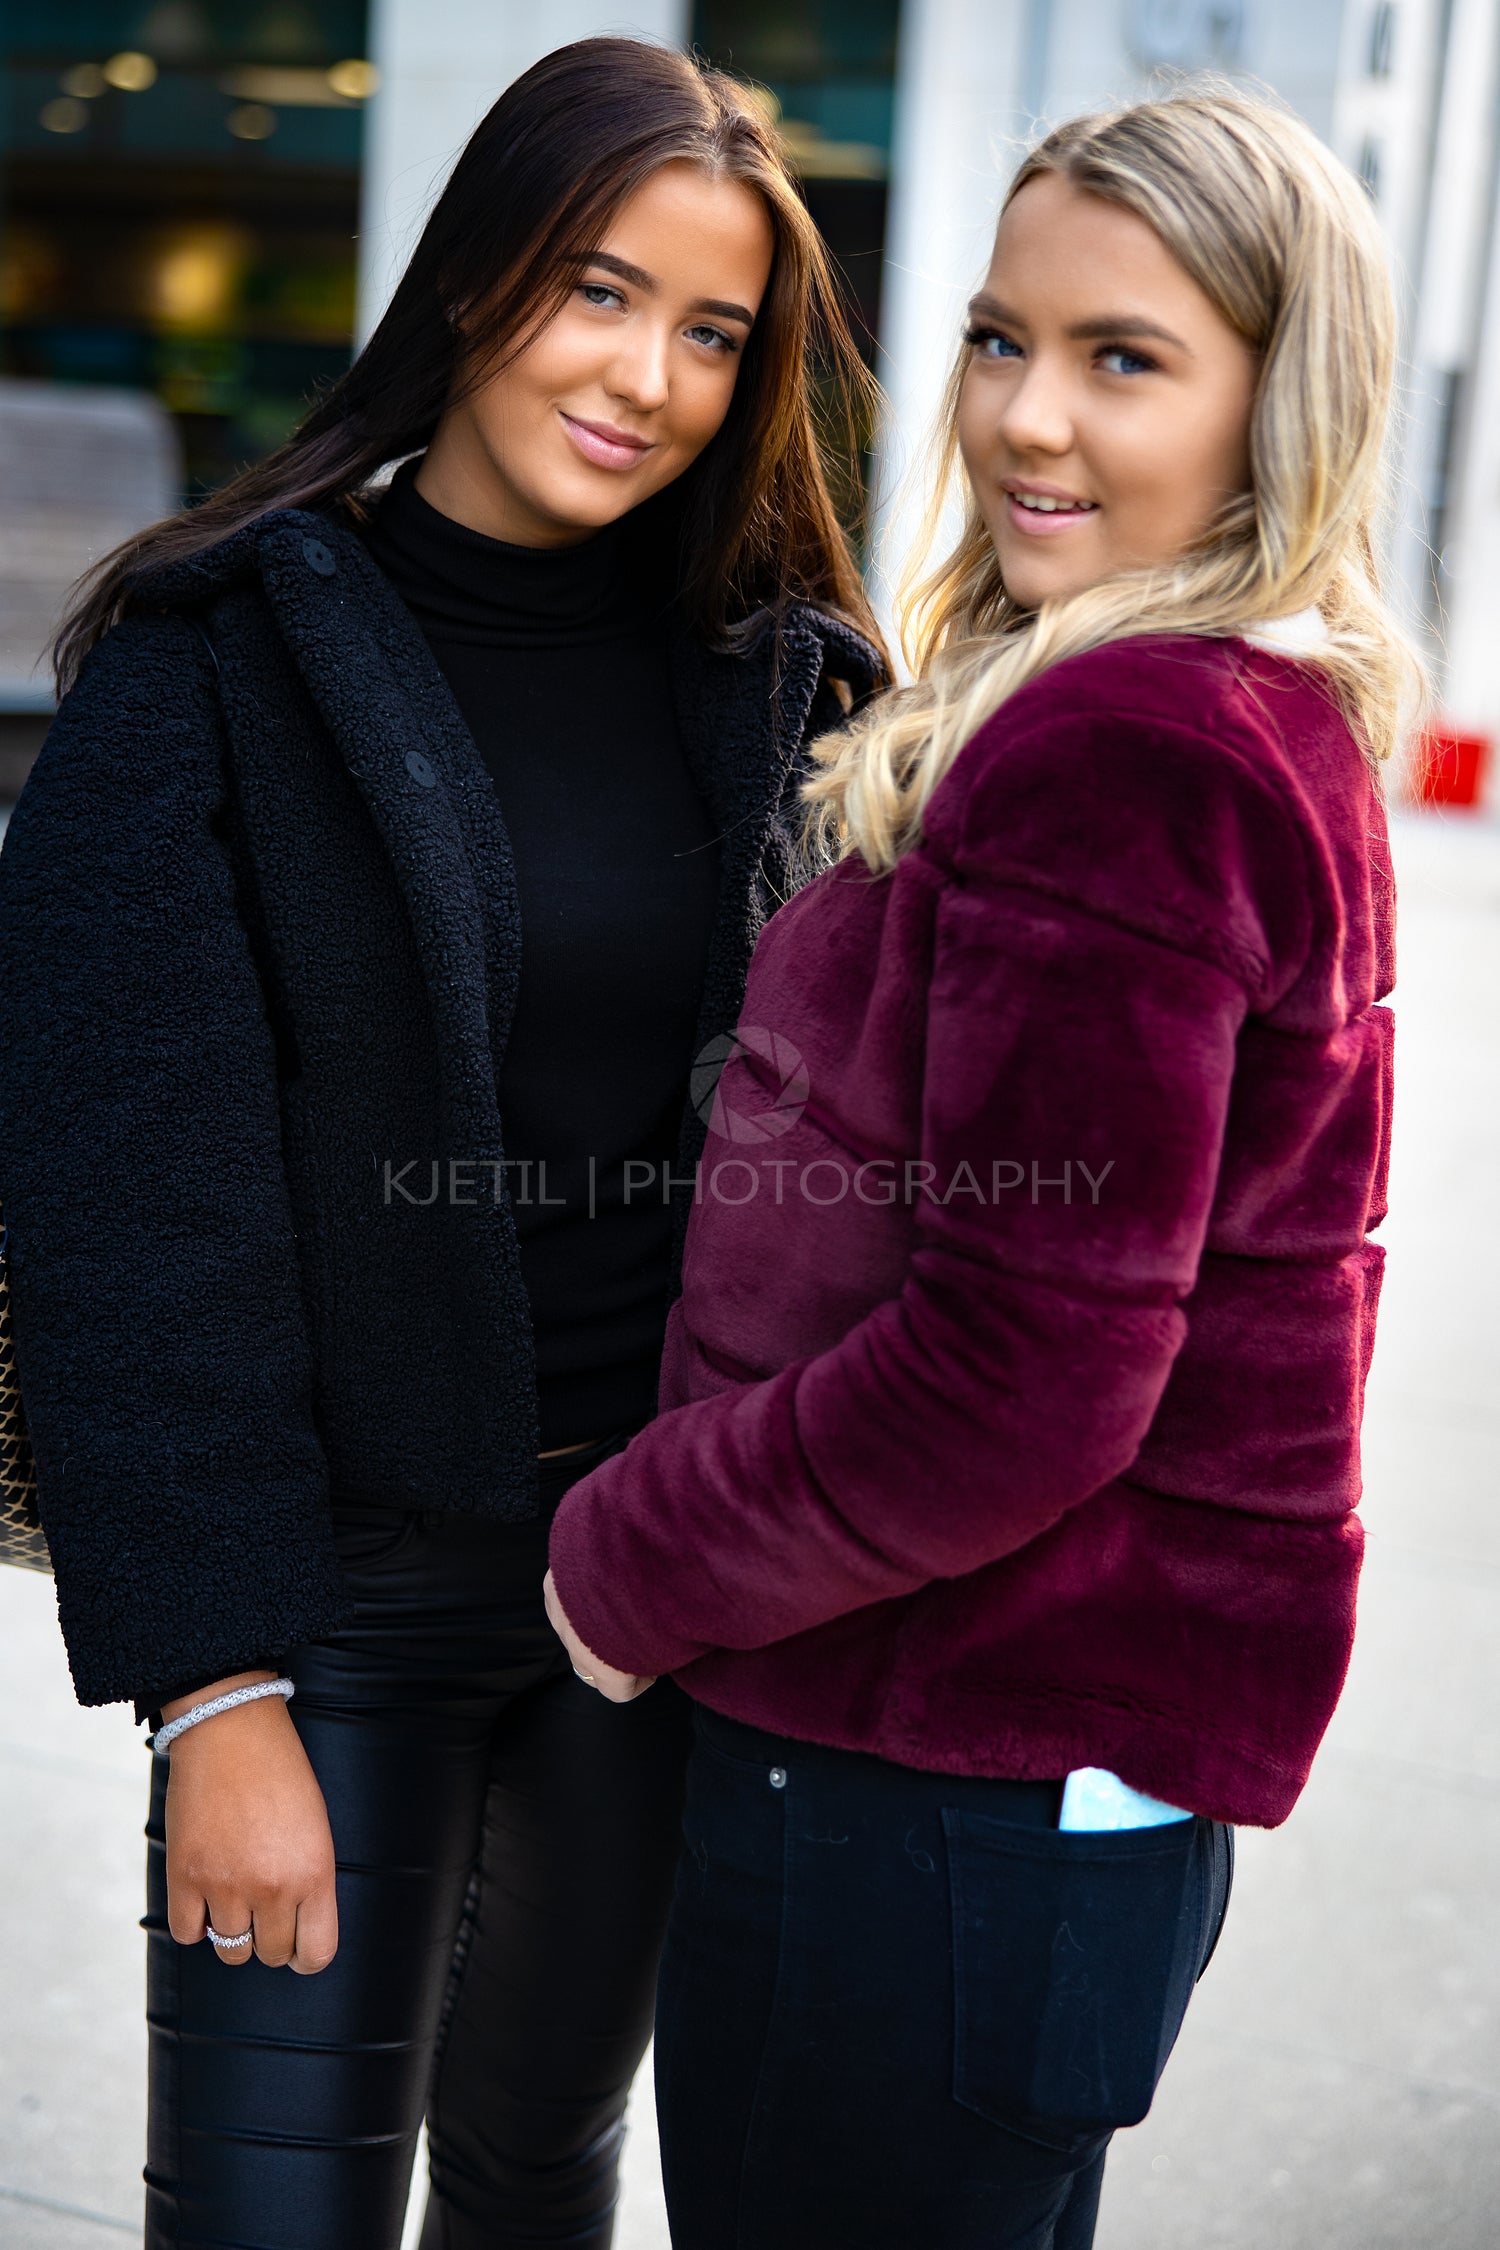 Portrait Of Two Smiling Beautiful Female Friends In City